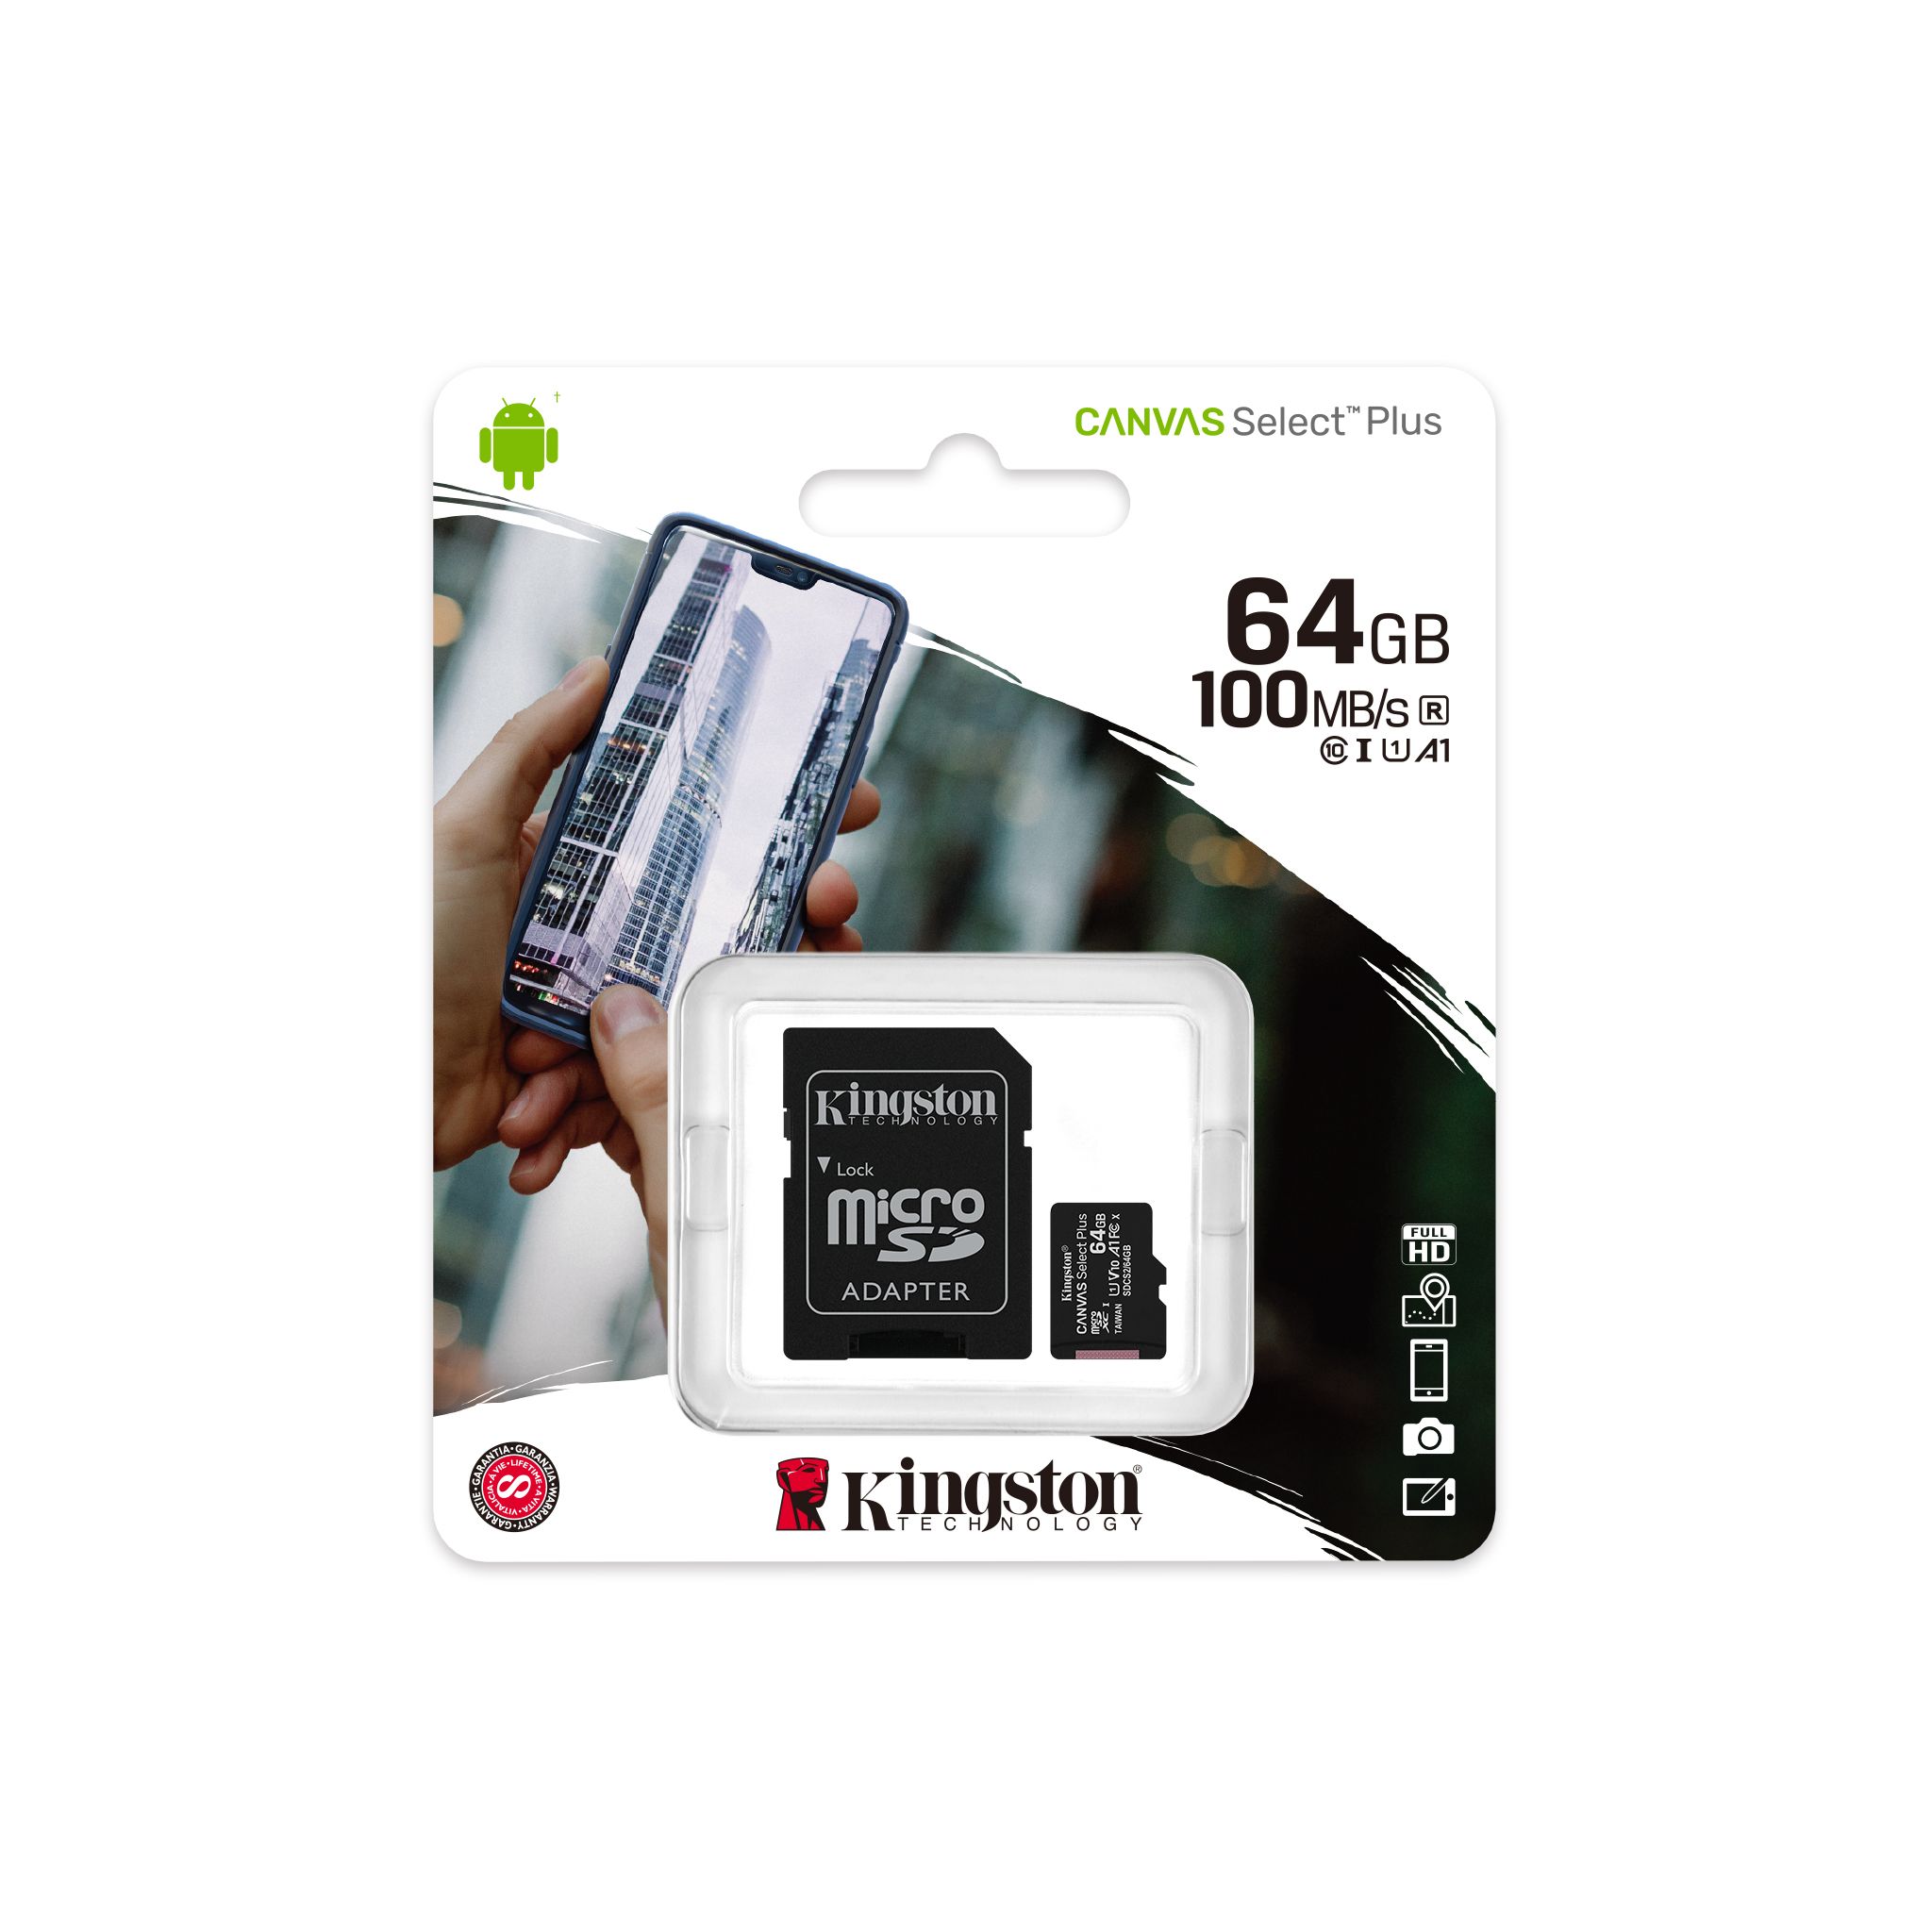 100MBs Works with Kingston Kingston 64GB Nokia 301 MicroSDXC Canvas Select Plus Card Verified by SanFlash. 